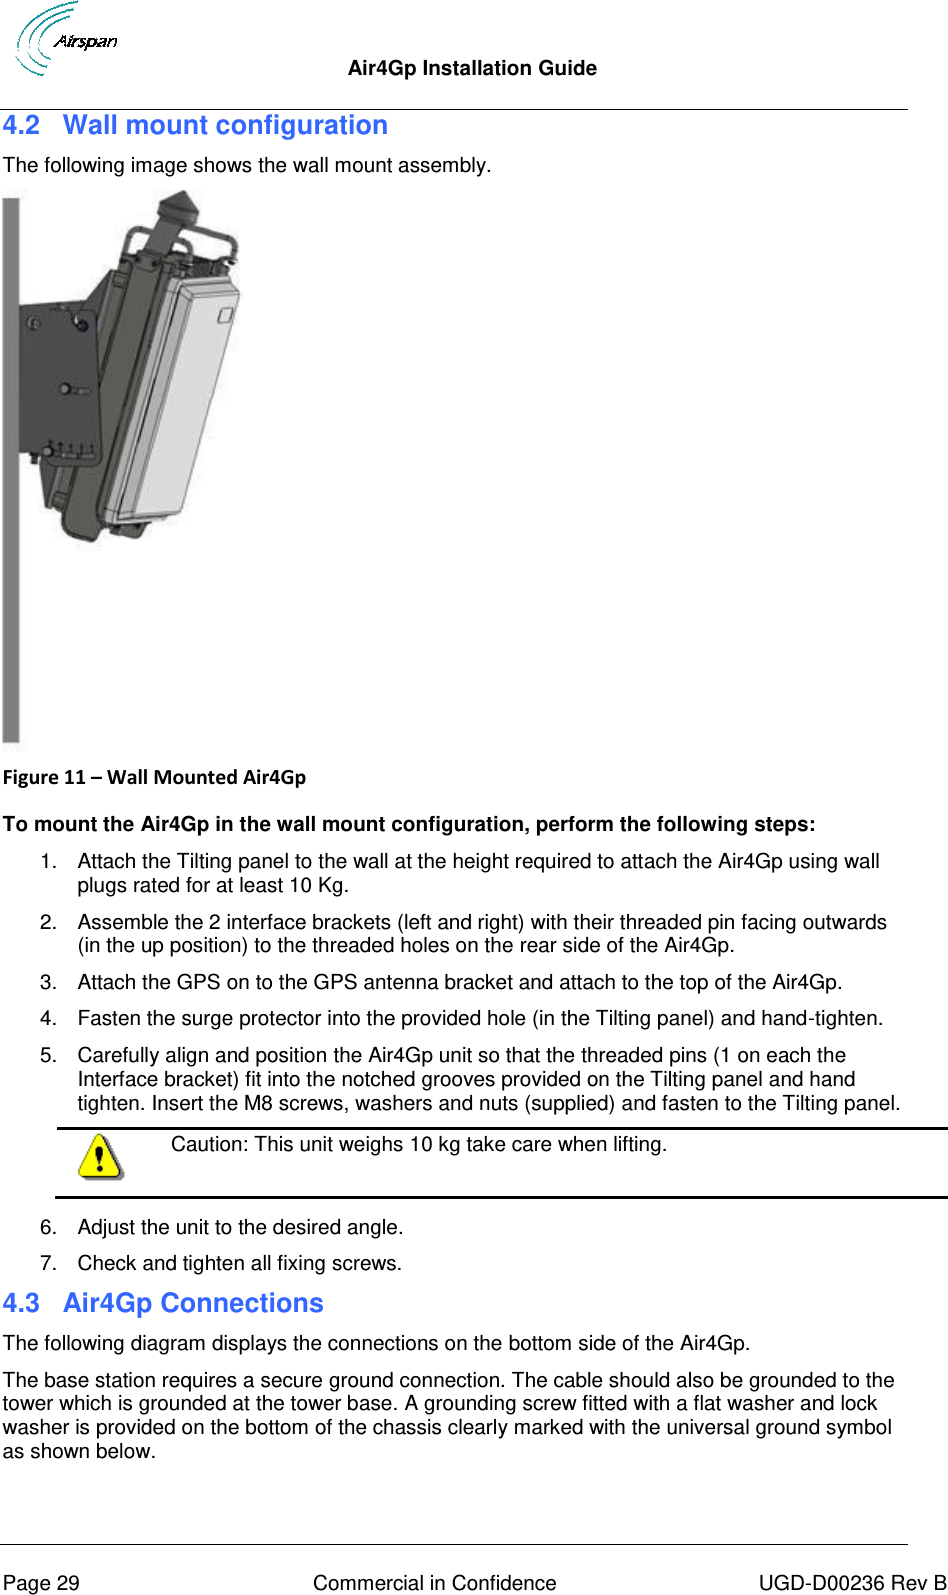  Air4Gp Installation Guide     Page 29  Commercial in Confidence  UGD-D00236 Rev B 4.2  Wall mount configuration The following image shows the wall mount assembly.  Figure 11 – Wall Mounted Air4Gp   To mount the Air4Gp in the wall mount configuration, perform the following steps: 1.  Attach the Tilting panel to the wall at the height required to attach the Air4Gp using wall plugs rated for at least 10 Kg. 2.  Assemble the 2 interface brackets (left and right) with their threaded pin facing outwards (in the up position) to the threaded holes on the rear side of the Air4Gp.  3.  Attach the GPS on to the GPS antenna bracket and attach to the top of the Air4Gp. 4.  Fasten the surge protector into the provided hole (in the Tilting panel) and hand-tighten. 5.  Carefully align and position the Air4Gp unit so that the threaded pins (1 on each the Interface bracket) fit into the notched grooves provided on the Tilting panel and hand tighten. Insert the M8 screws, washers and nuts (supplied) and fasten to the Tilting panel.  Caution: This unit weighs 10 kg take care when lifting.  6.  Adjust the unit to the desired angle. 7.  Check and tighten all fixing screws. 4.3  Air4Gp Connections The following diagram displays the connections on the bottom side of the Air4Gp.  The base station requires a secure ground connection. The cable should also be grounded to the tower which is grounded at the tower base. A grounding screw fitted with a flat washer and lock washer is provided on the bottom of the chassis clearly marked with the universal ground symbol as shown below. 